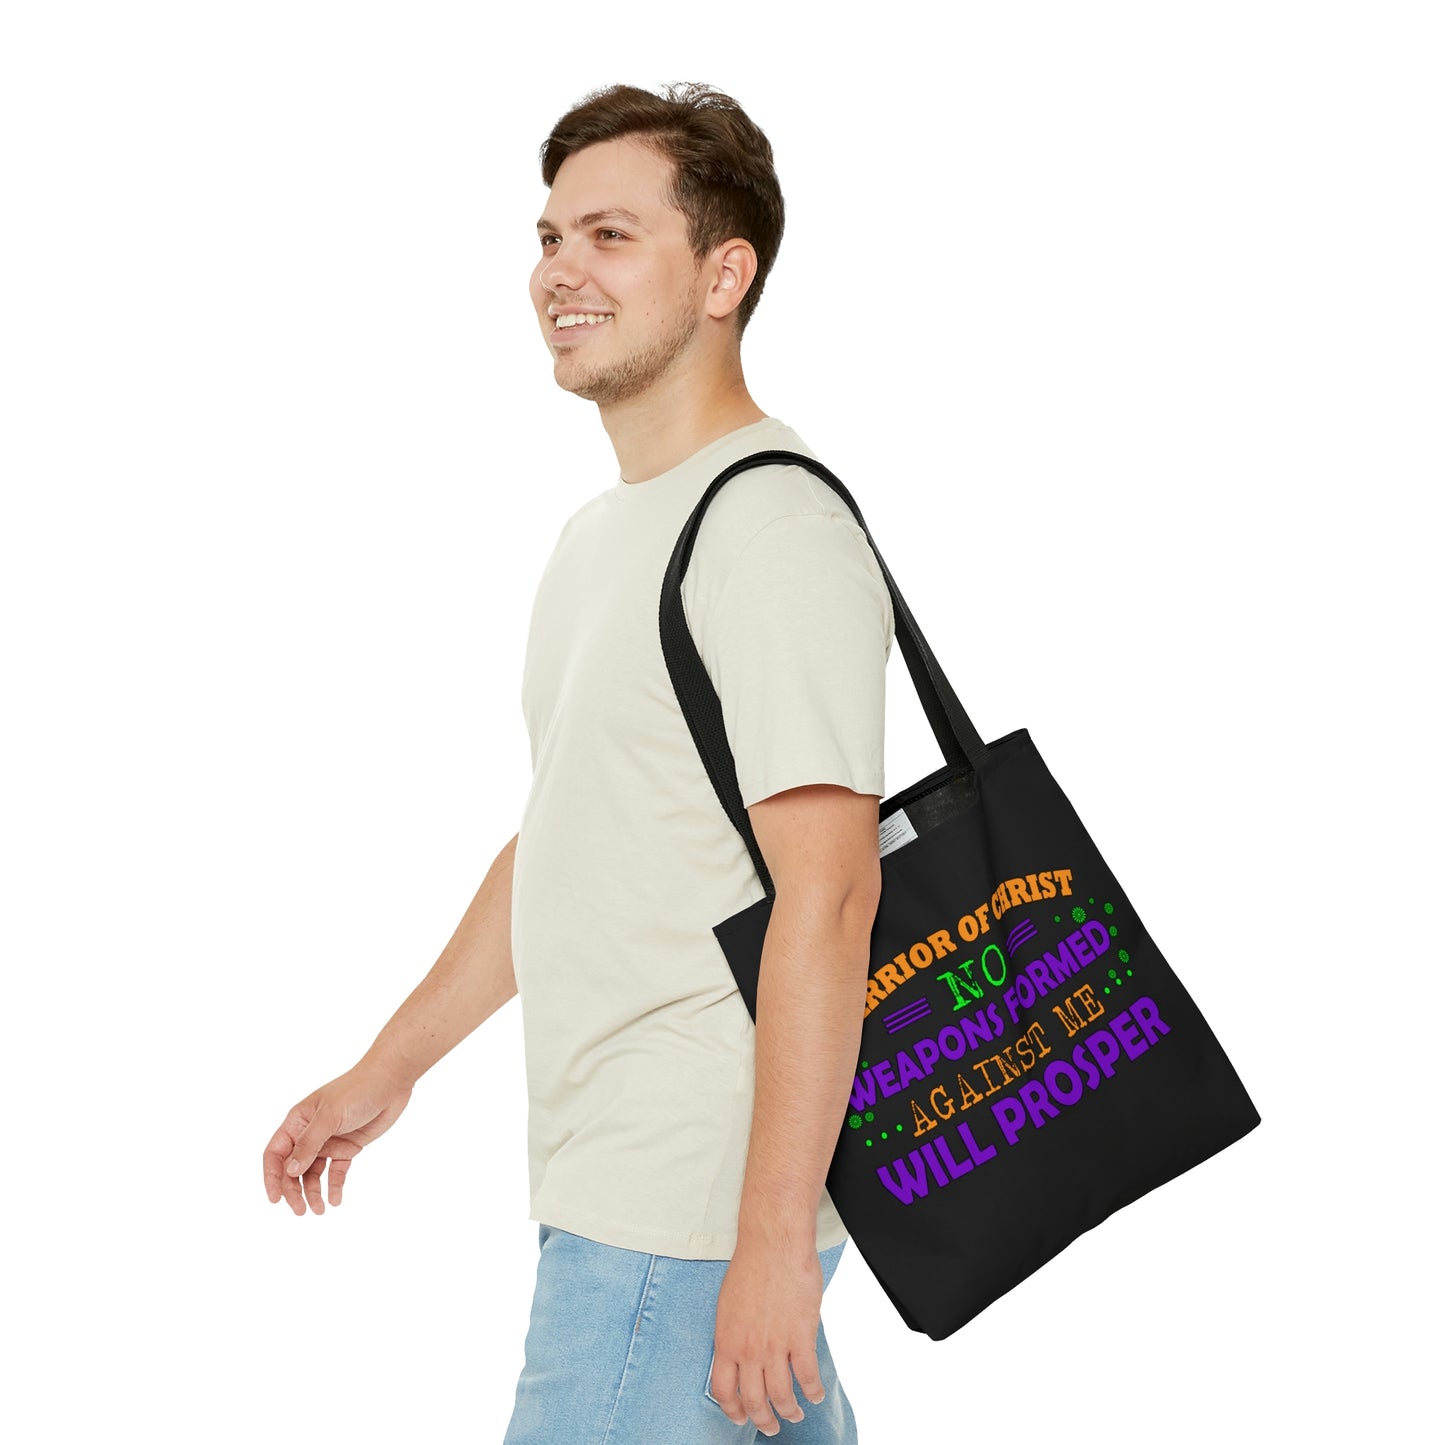 Warrior Of Christ No Weapons Formed Against Me Will Prosper Tote Bag